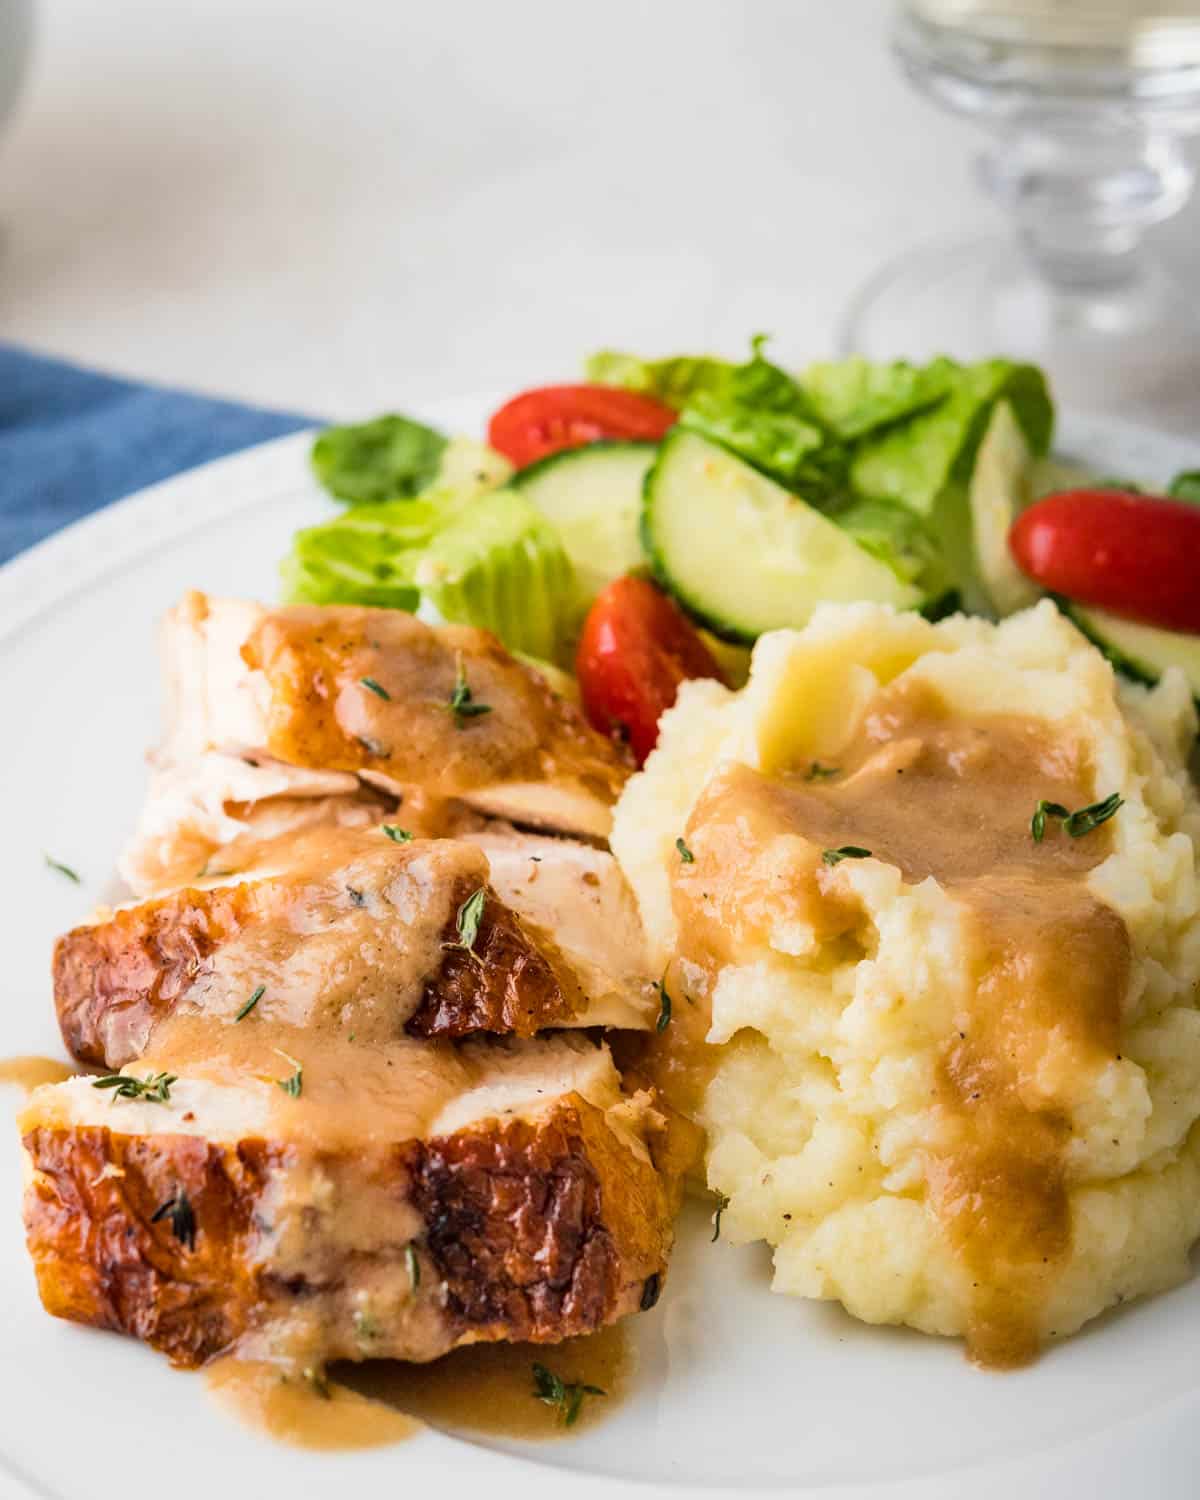 Three slices of chicken sauced with homemade gravy and a side of mashed potatoes.